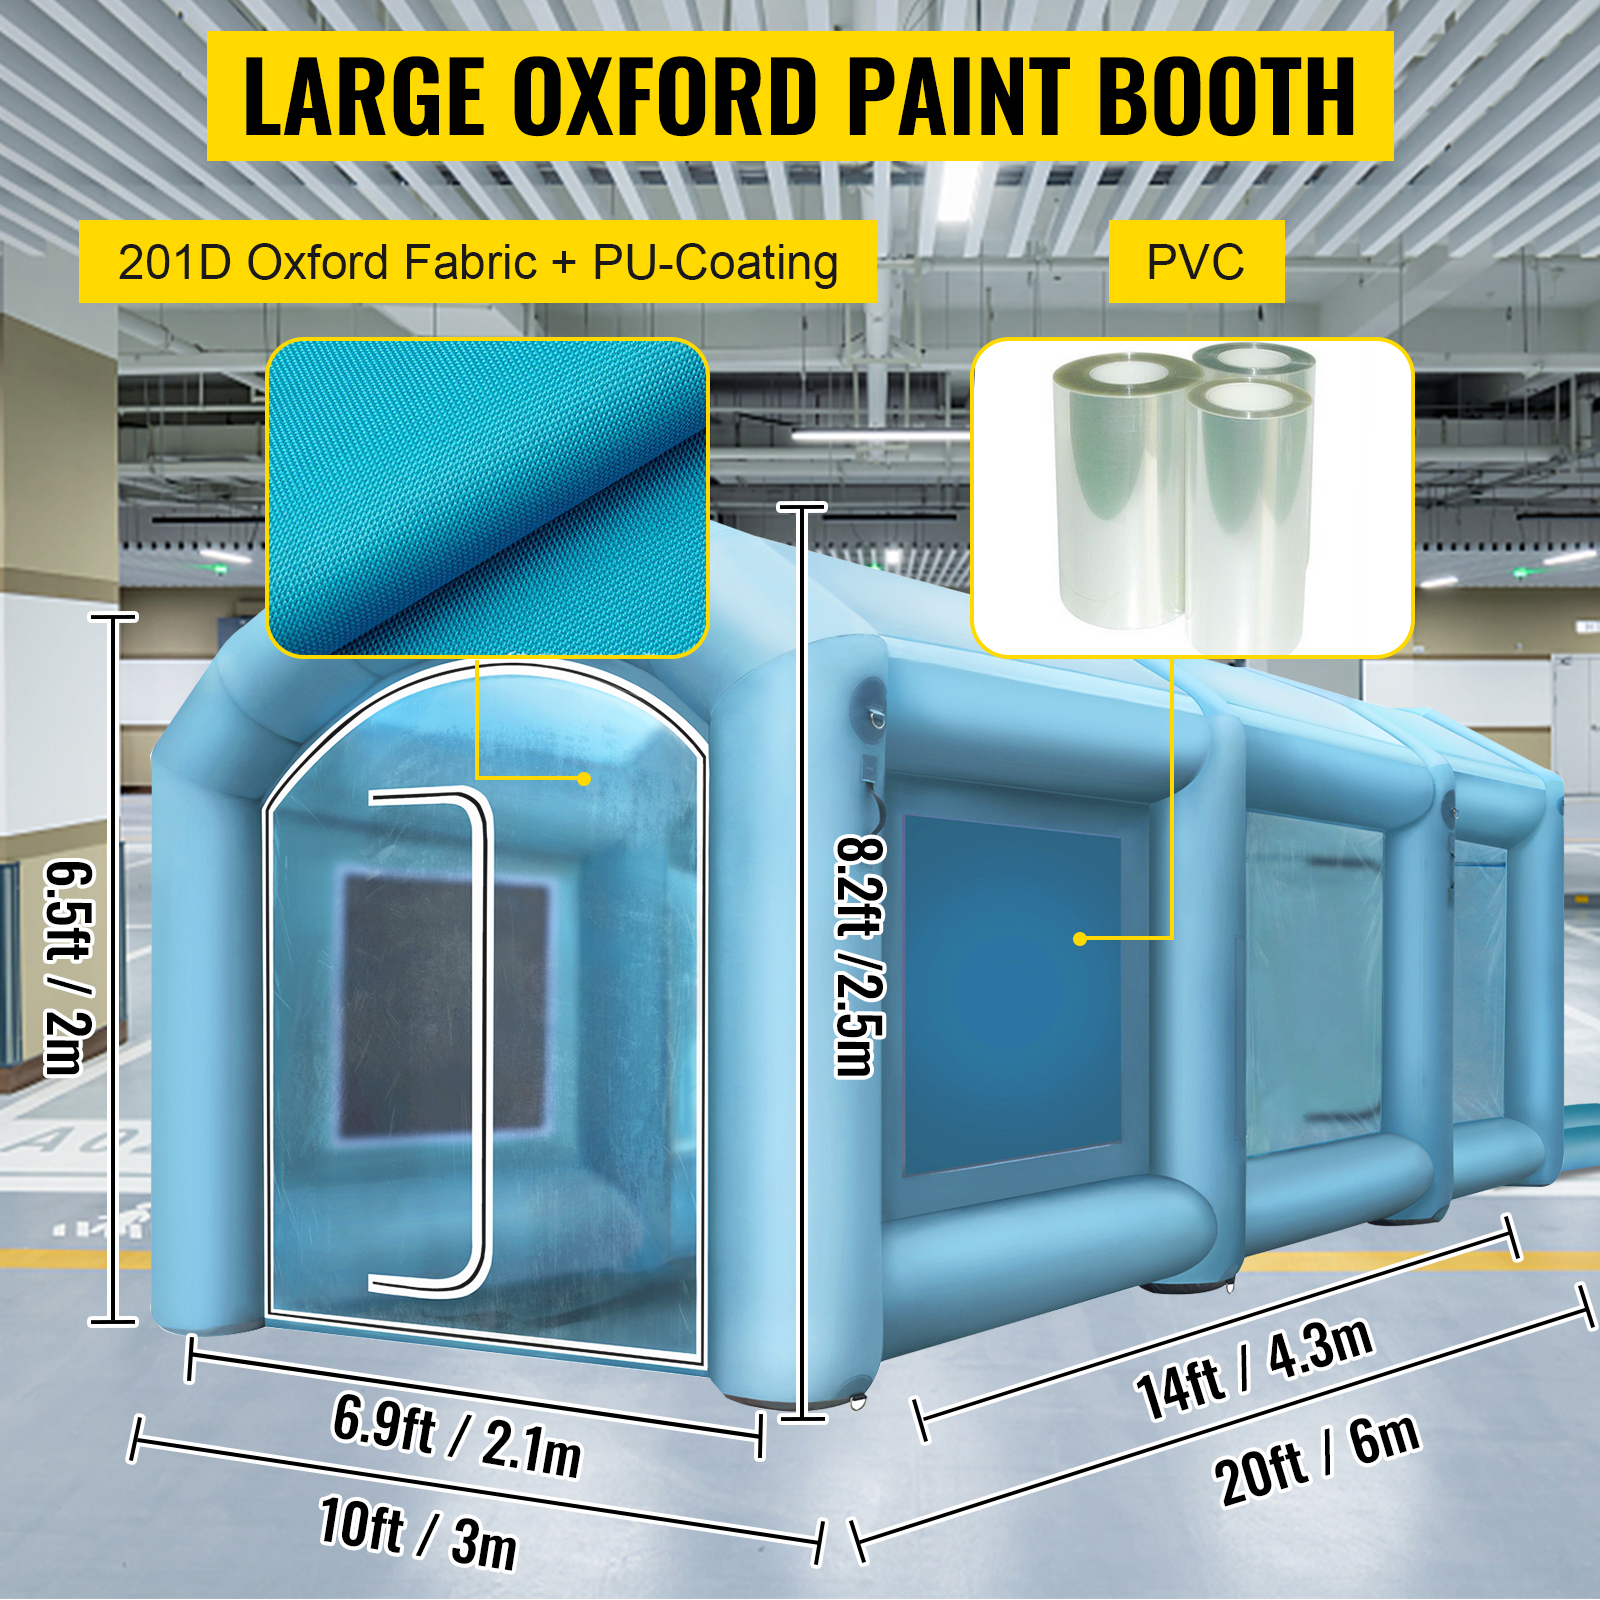 VEVOR Portable Inflatable Paint Booth, 26x15x10ft Inflatable Spray Booth,  Car Paint Tent w/Air Filter System & 2 Blowers, Upgraded Blow Up Spray  Booth Tent, Auto Paint Workstation, Car Parking Garage